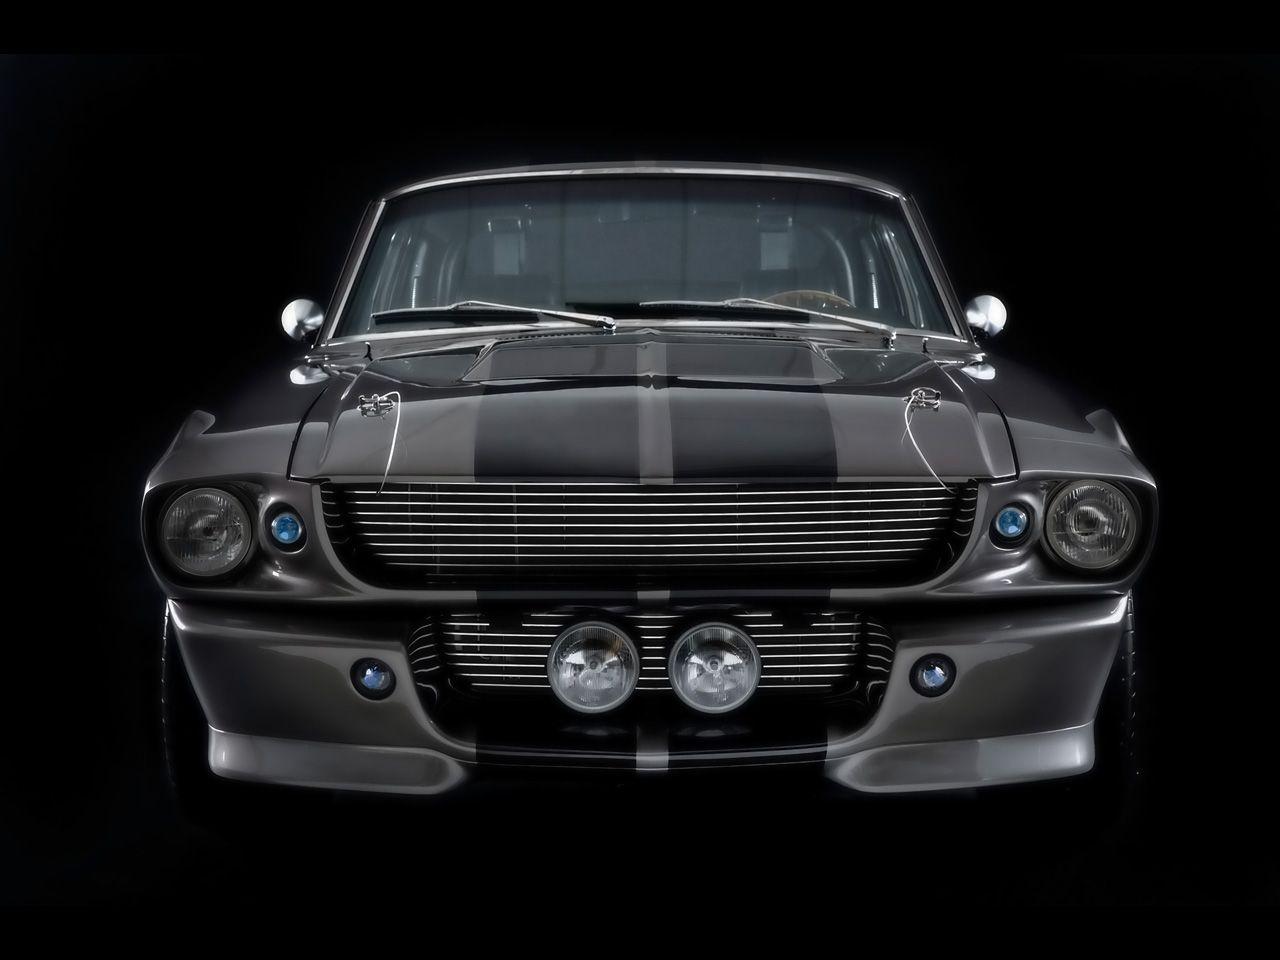 Ford Mustang Fastback Wallpaper For The iPhone And Ipod Picture